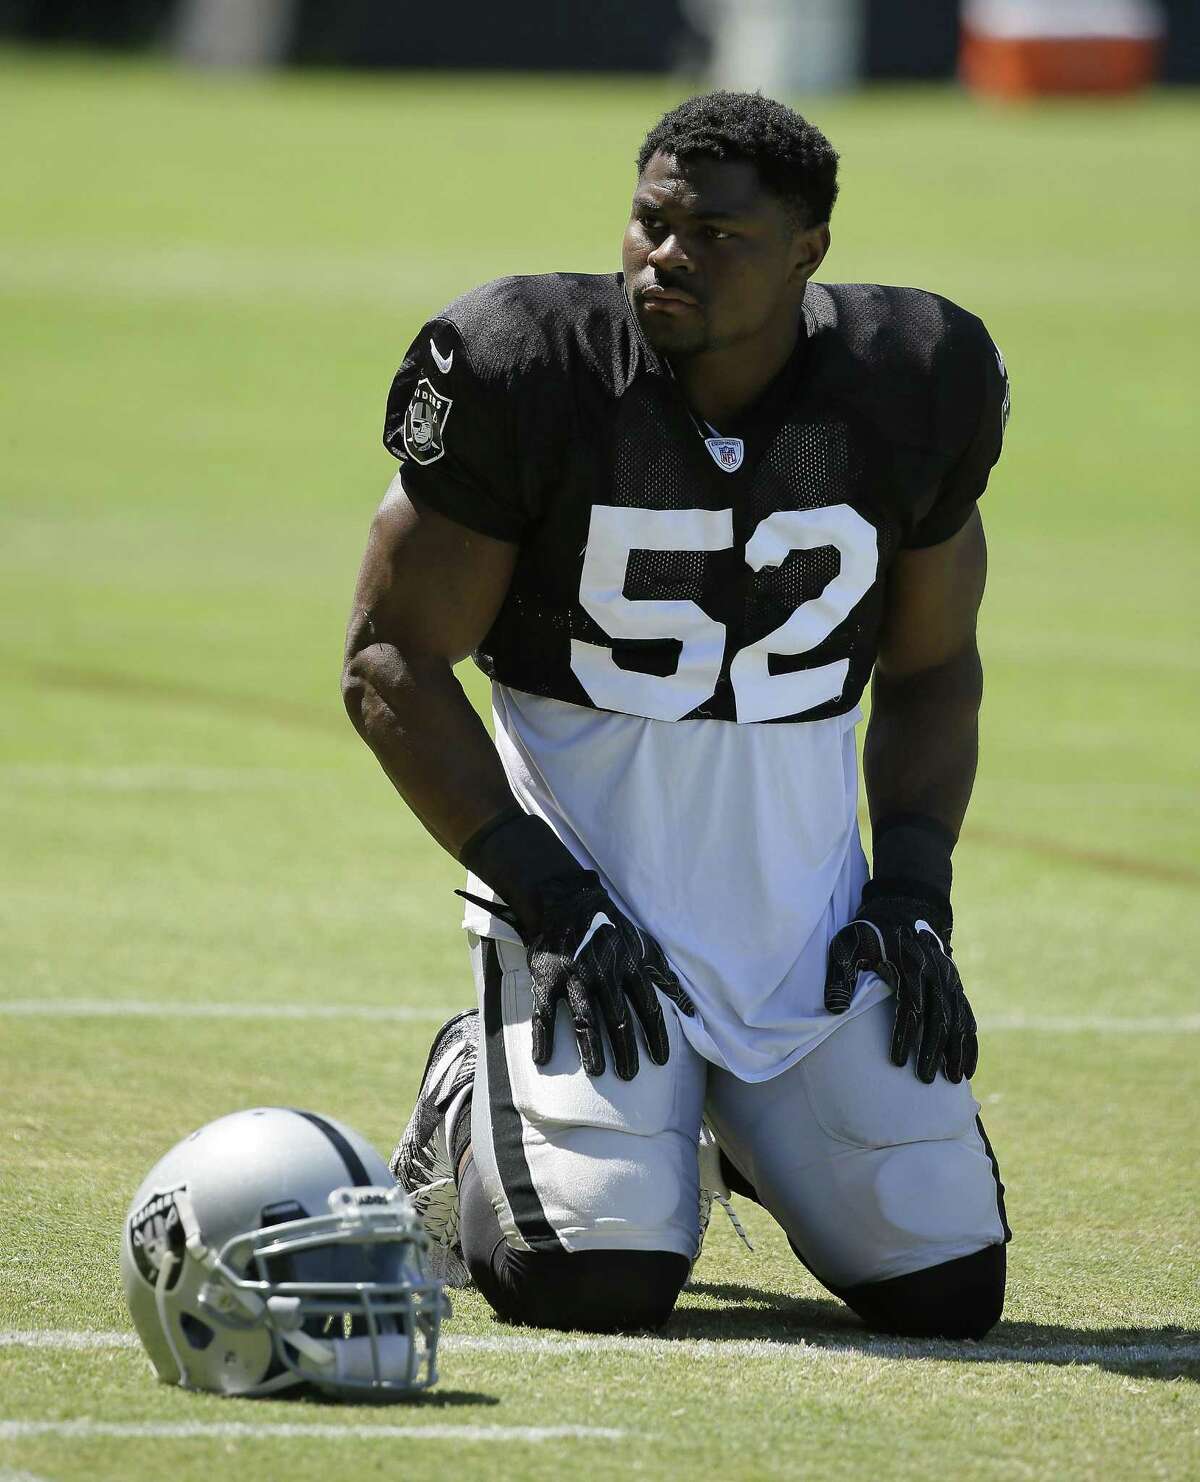 For Raiders, Khalil Mack's absence is hard to miss